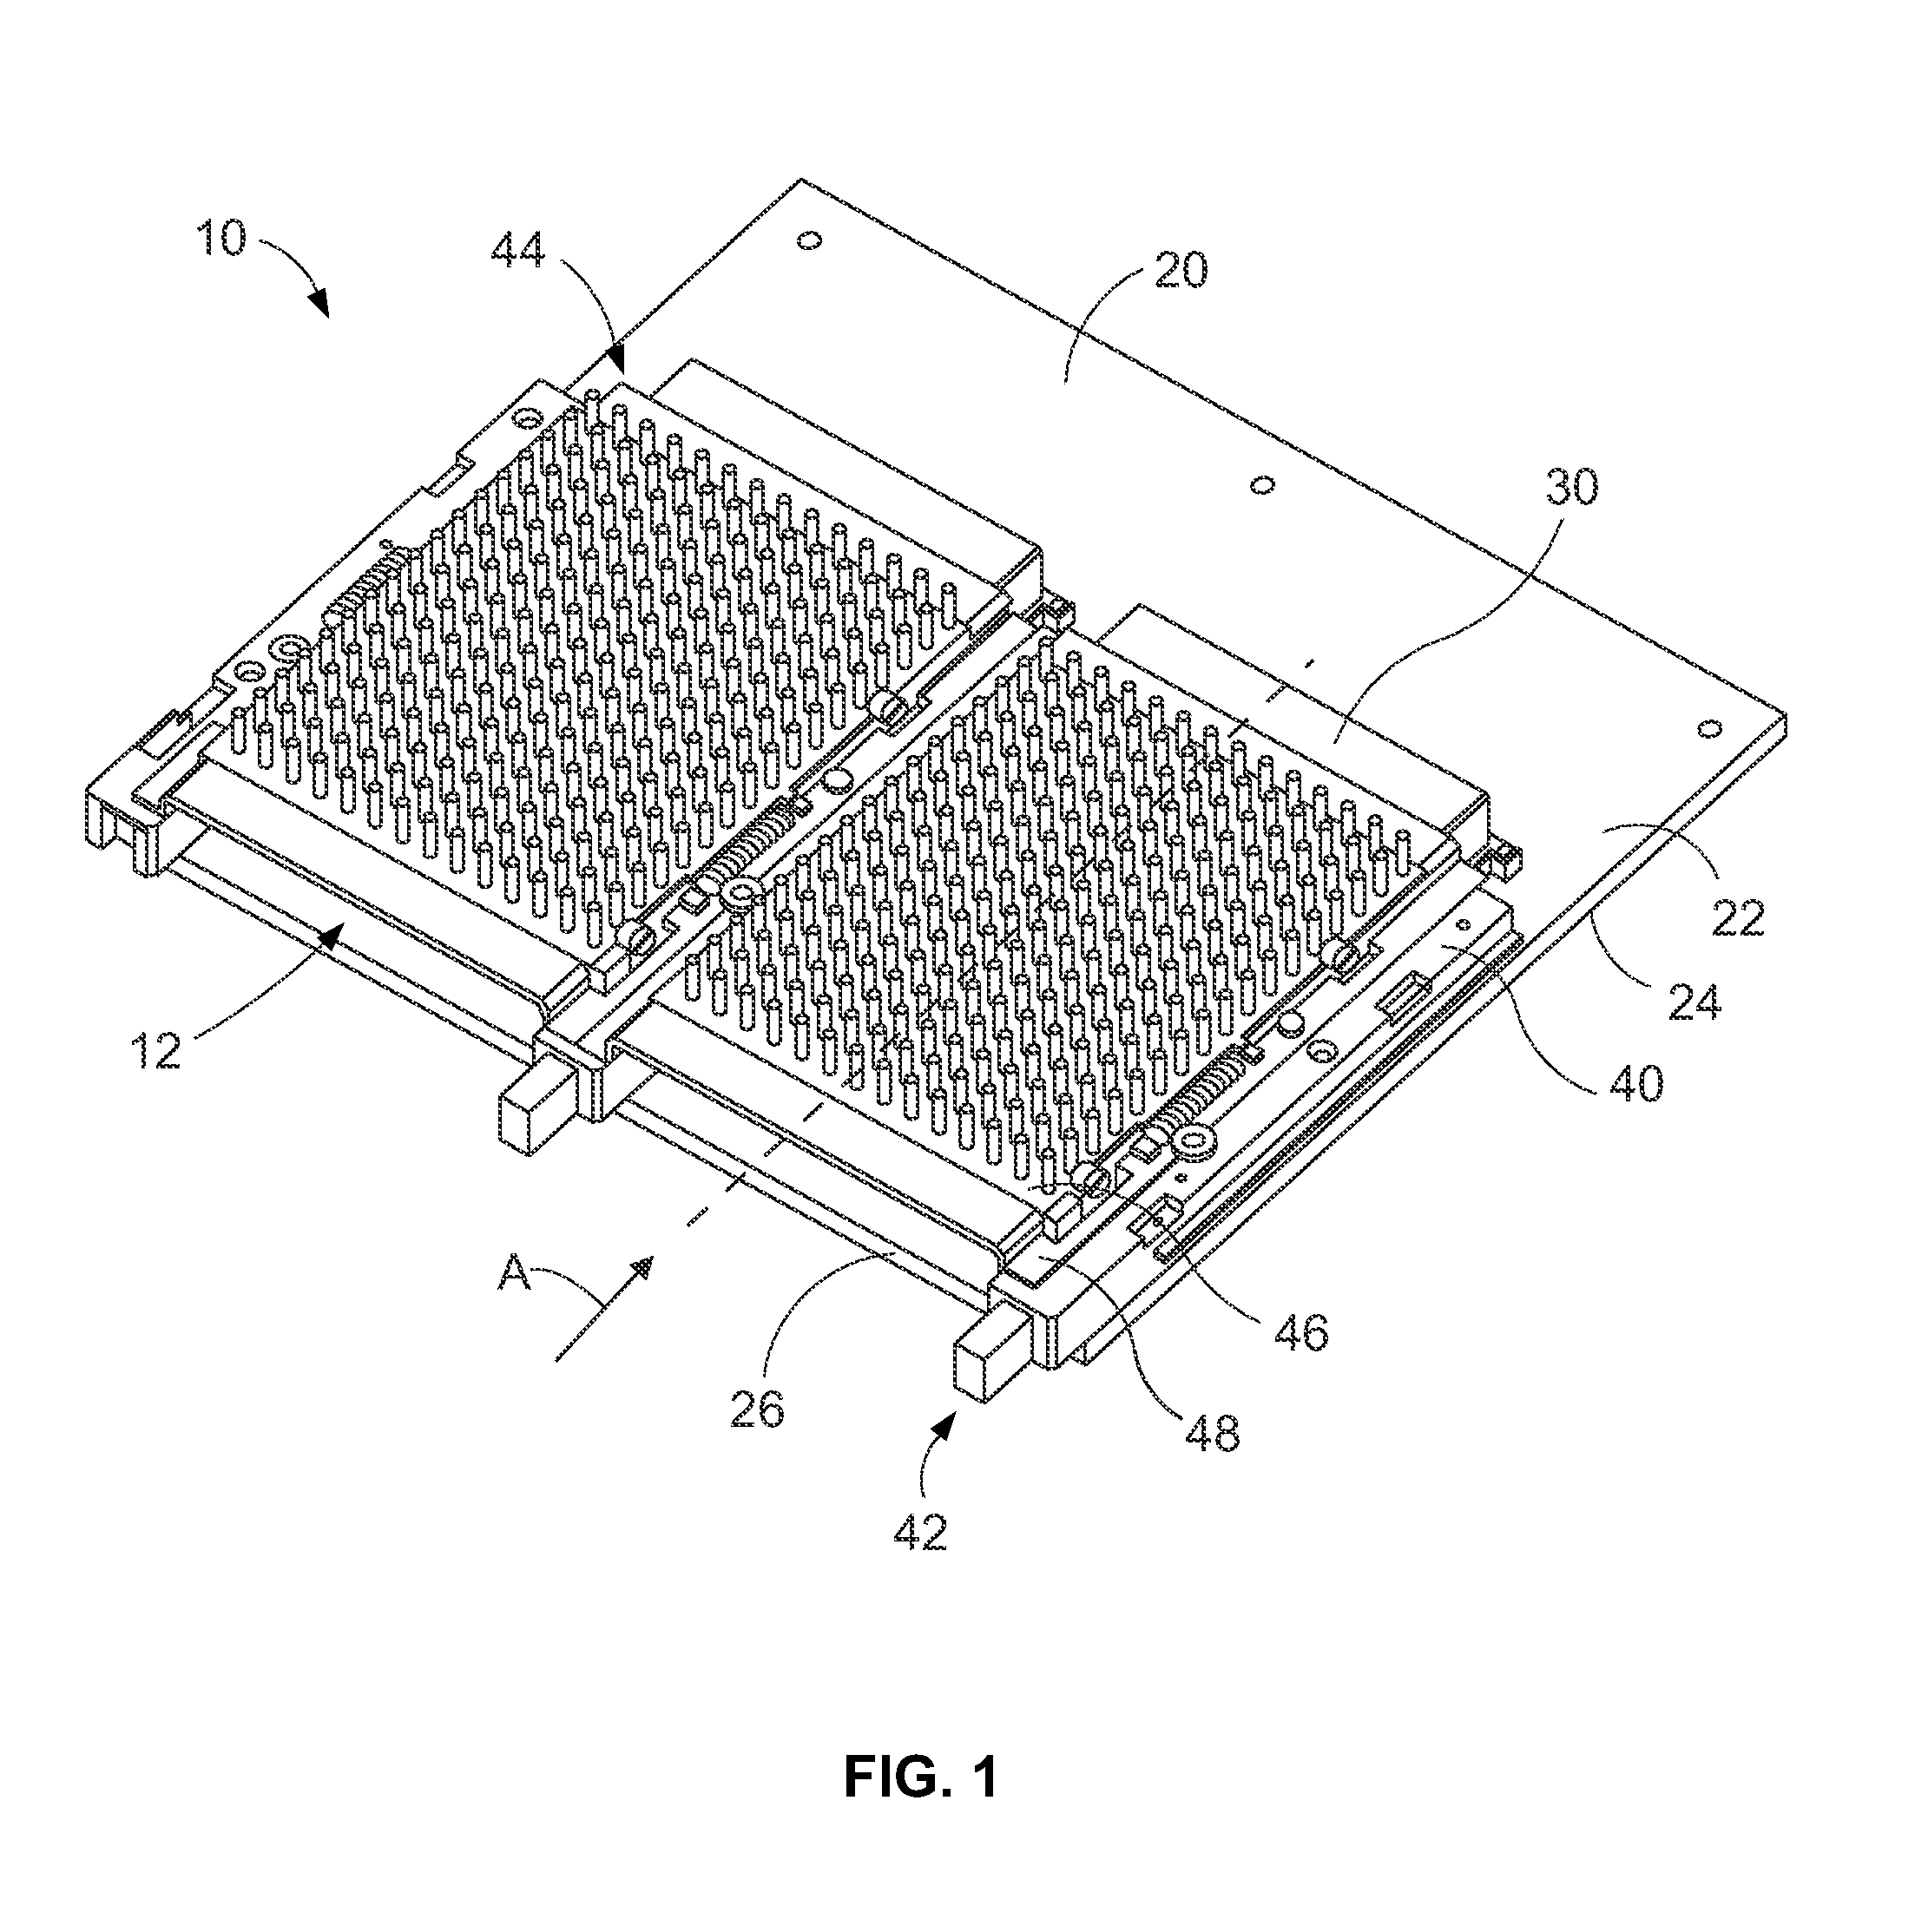 Heat sink assembly for a pluggable module